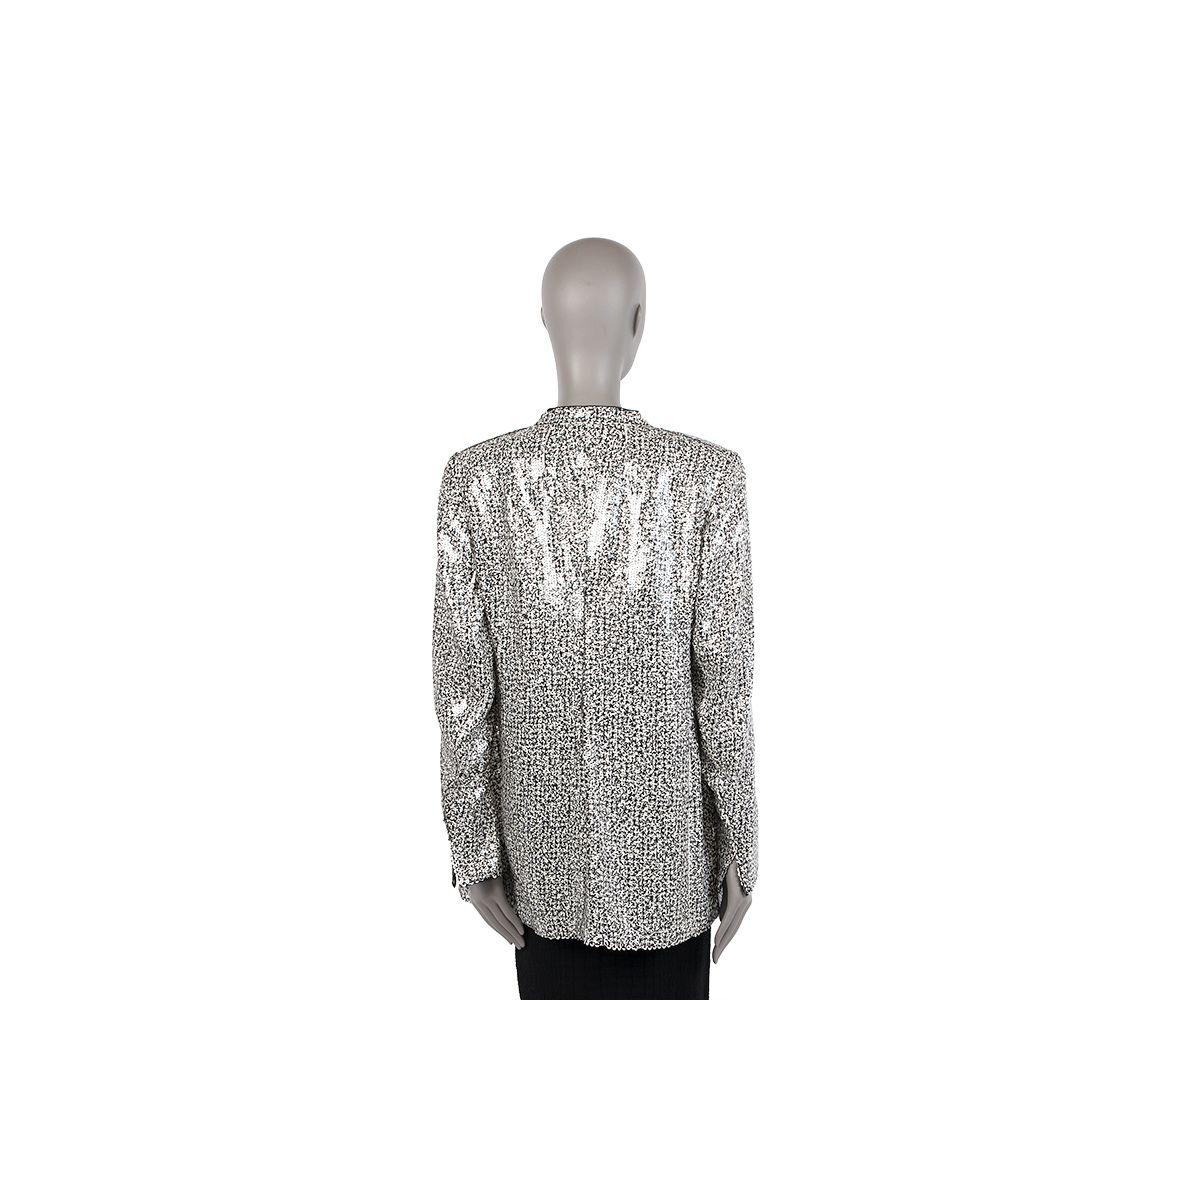 100% authentic Akris collarless sequins box jacket in black and white polyester (97%), nylon (3%), and silk (100%) with slit cuffs. Closes with three hook-and-eye closures. Lined in black silk (100%). Has been worn and is in excellent